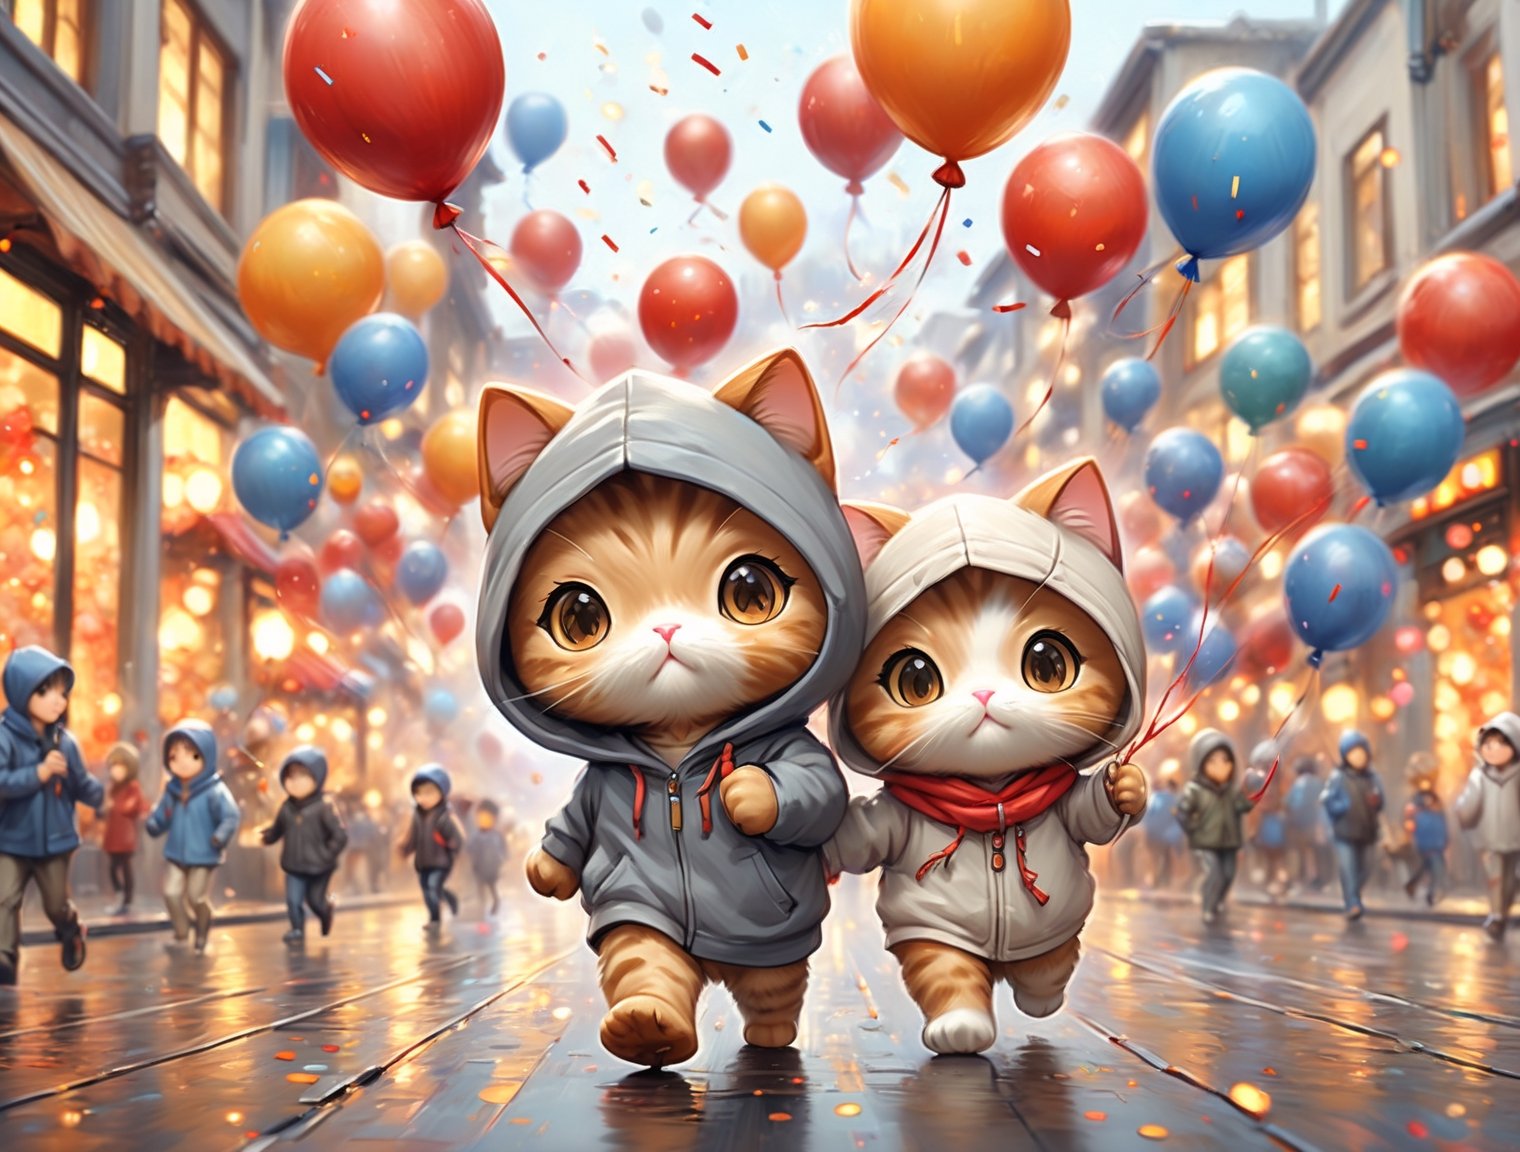 ((chibi style)), chibi cat in hoodie walking on busy street, new year setting, balloon and firecrackers, dynamic angle, depth of field, detail XL, closeup shot, finetune,ghibli,digital painting